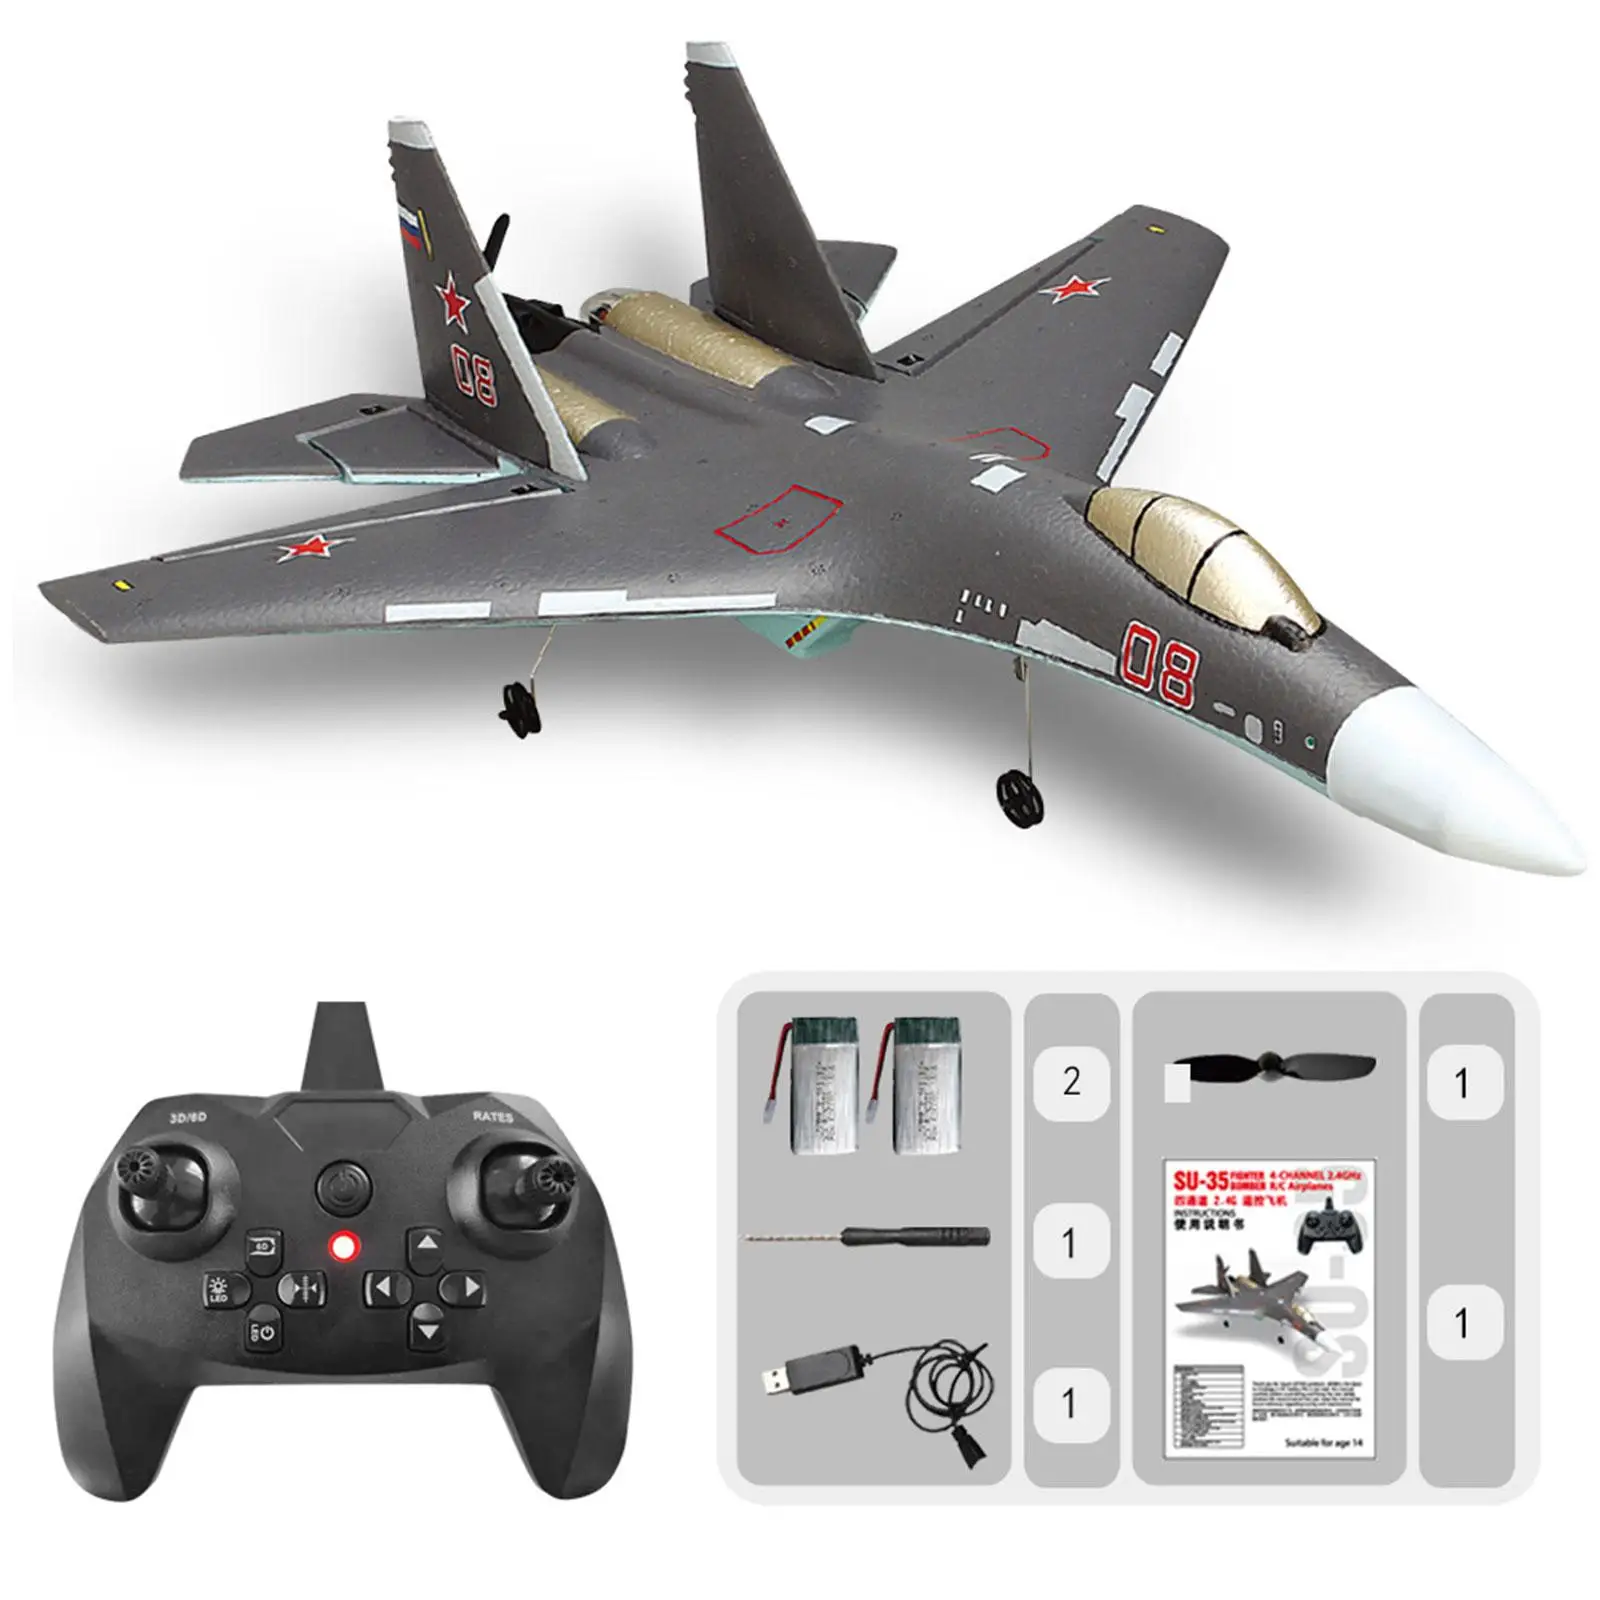 Remote Control Airplane 4CH Flying Time 15Min Control Distance 300Meter 6 Axis Fighter Jet for Boys Adults Teens Beginners